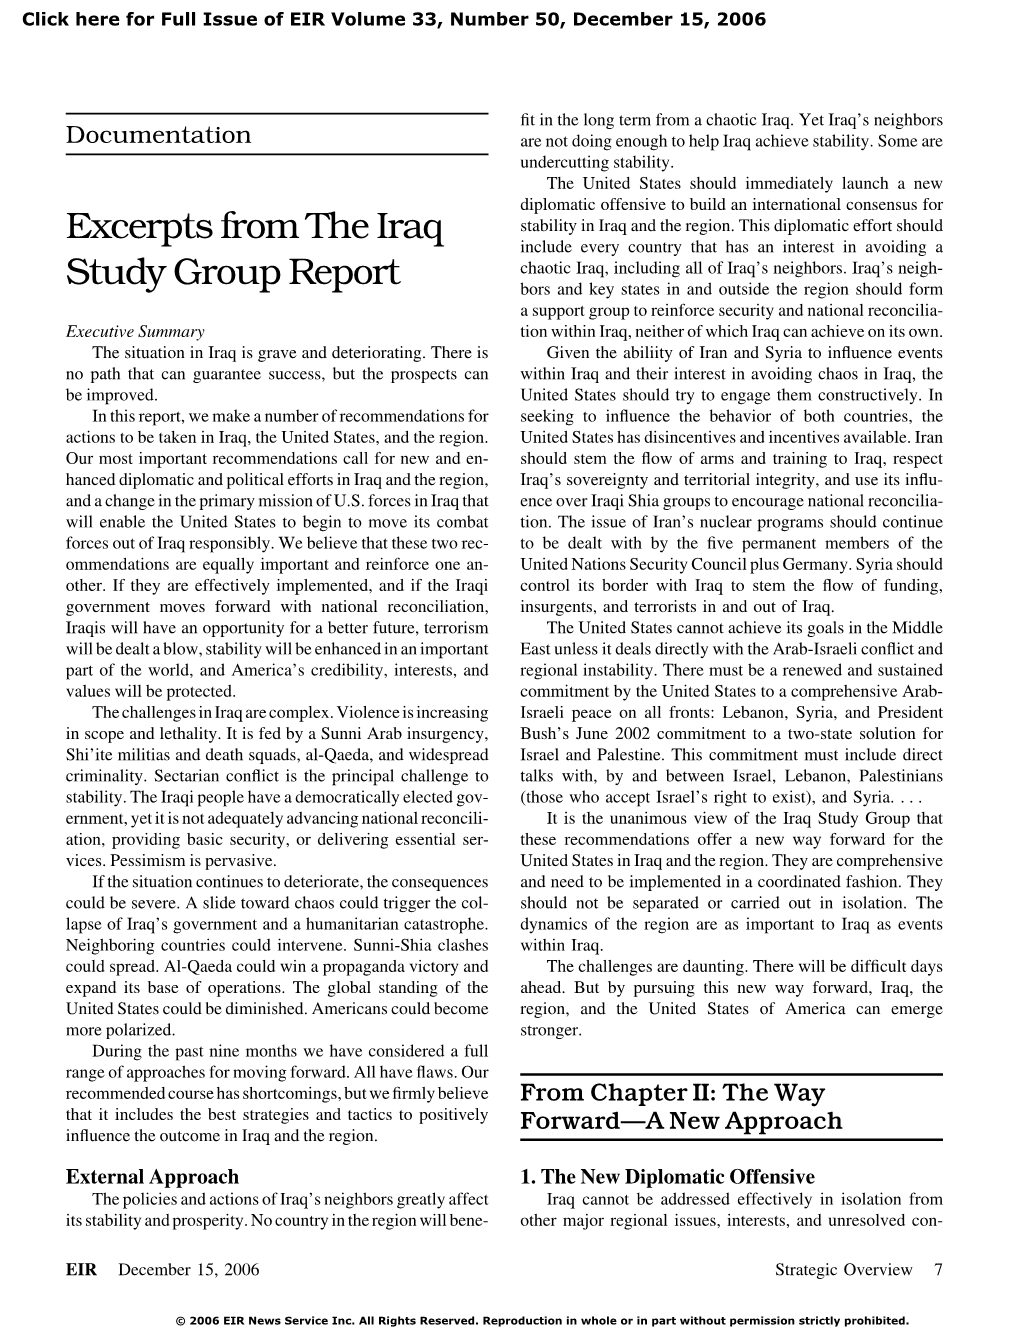 Excerpts from the Iraq Study Group Report